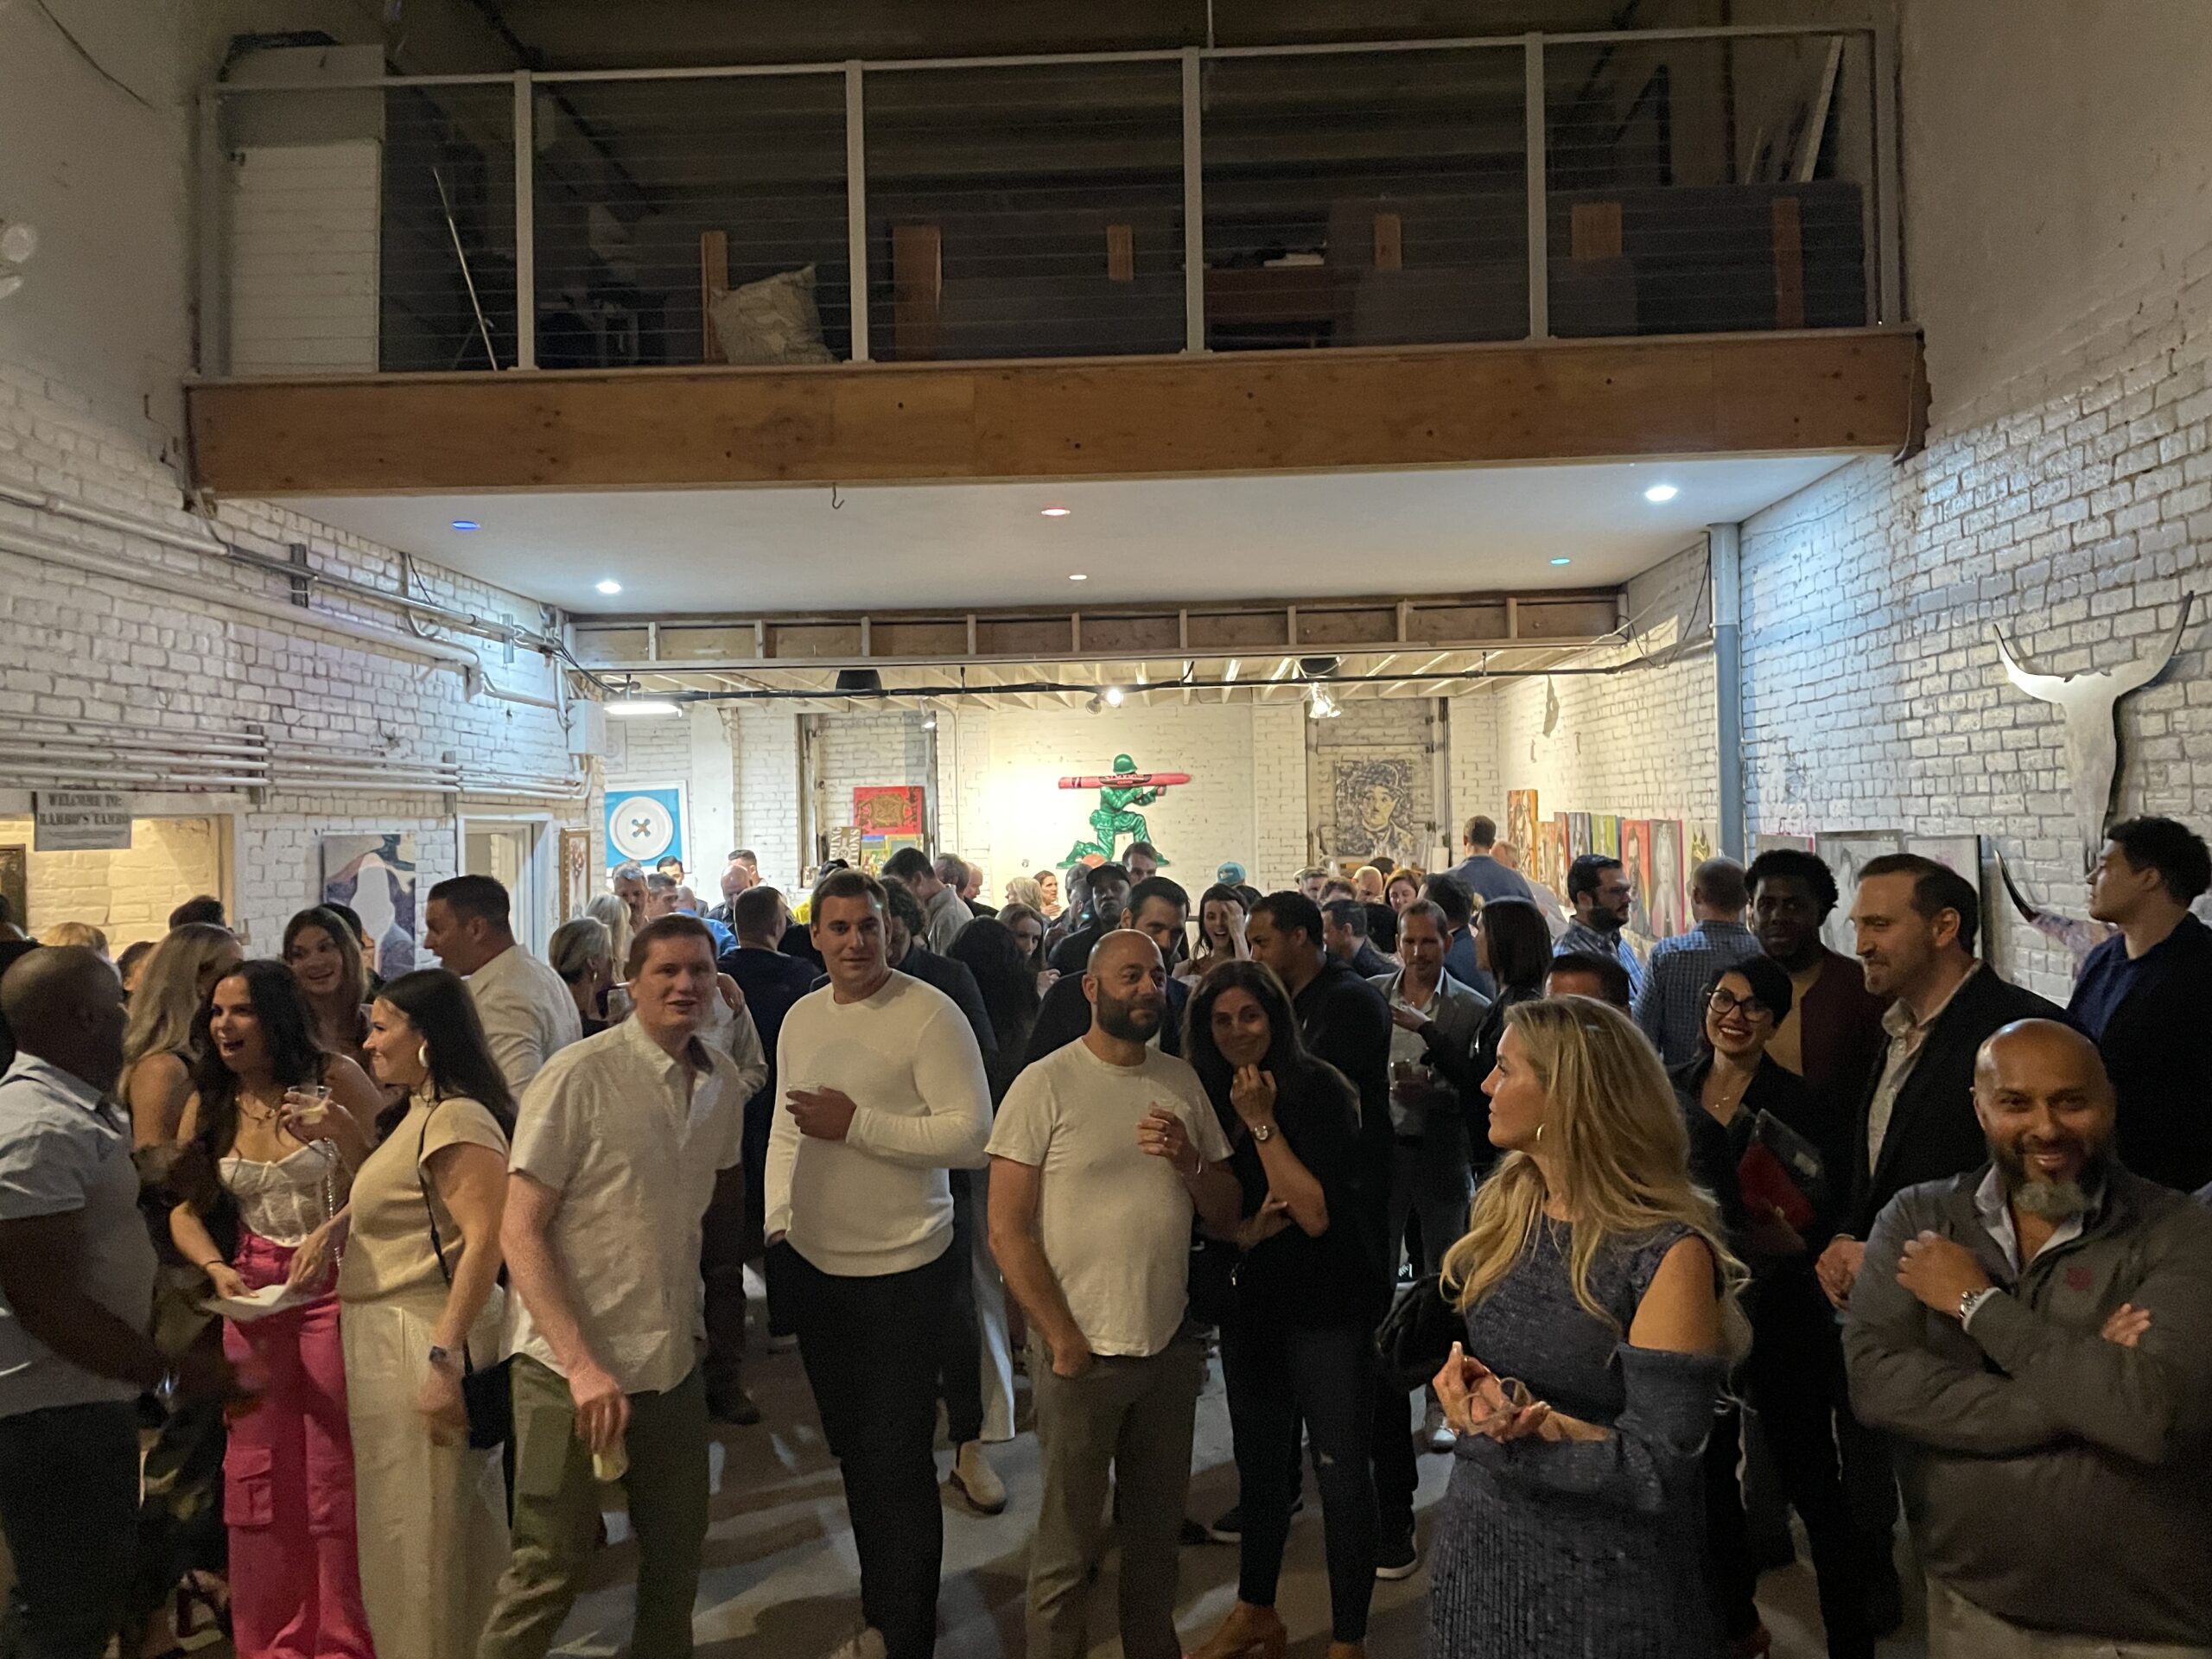 Over 200 guests attended "Just Cause" at the Boston Button Factory